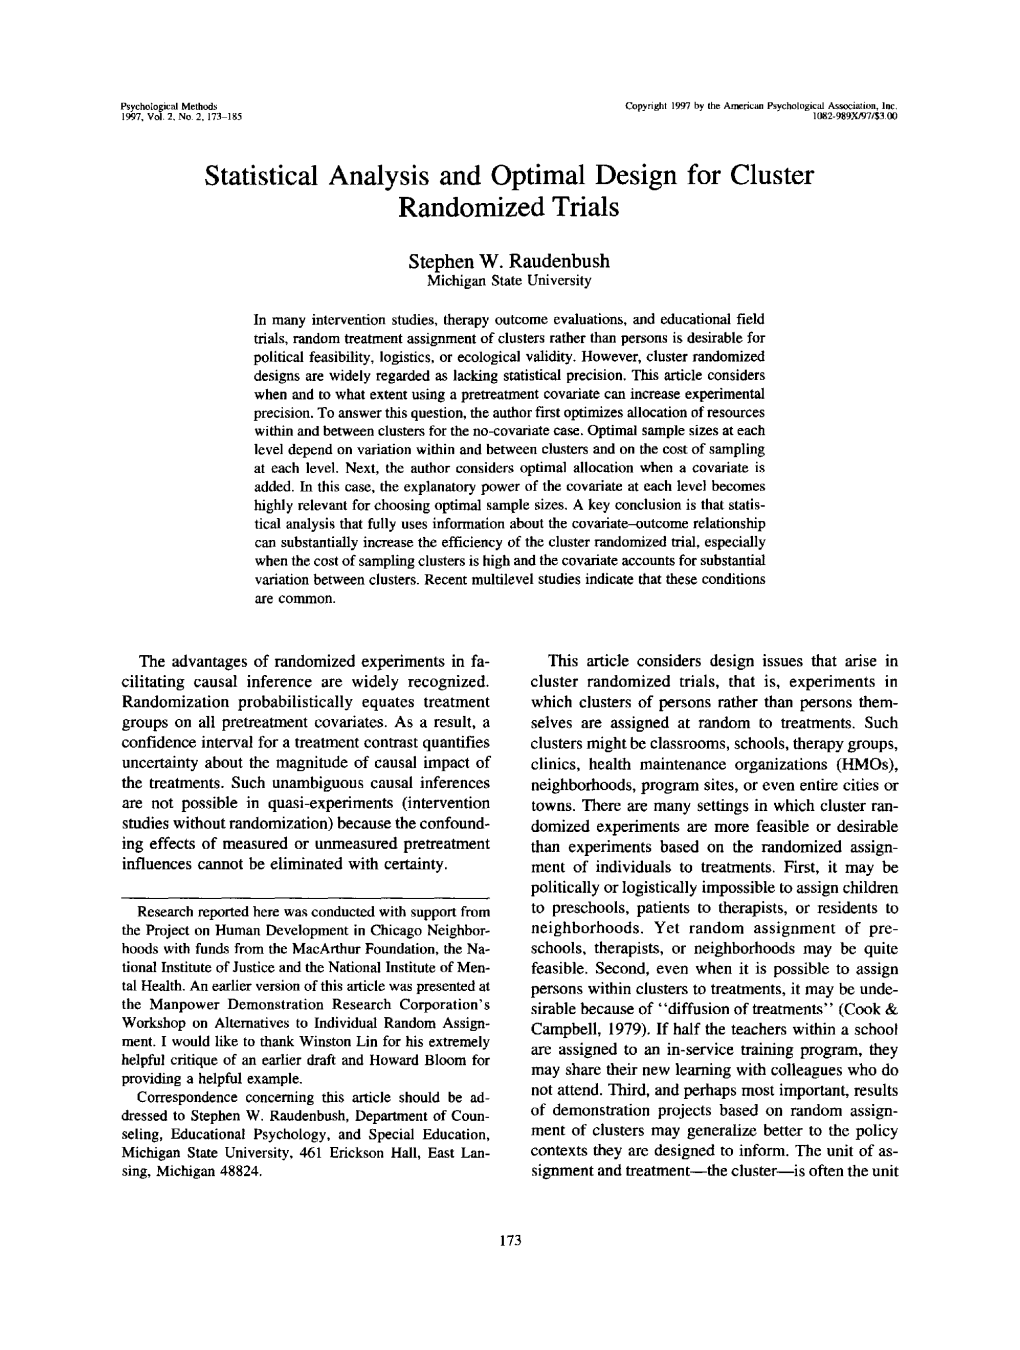 Statistical Analysis and Optimal Design for Cluster Randomized Trials